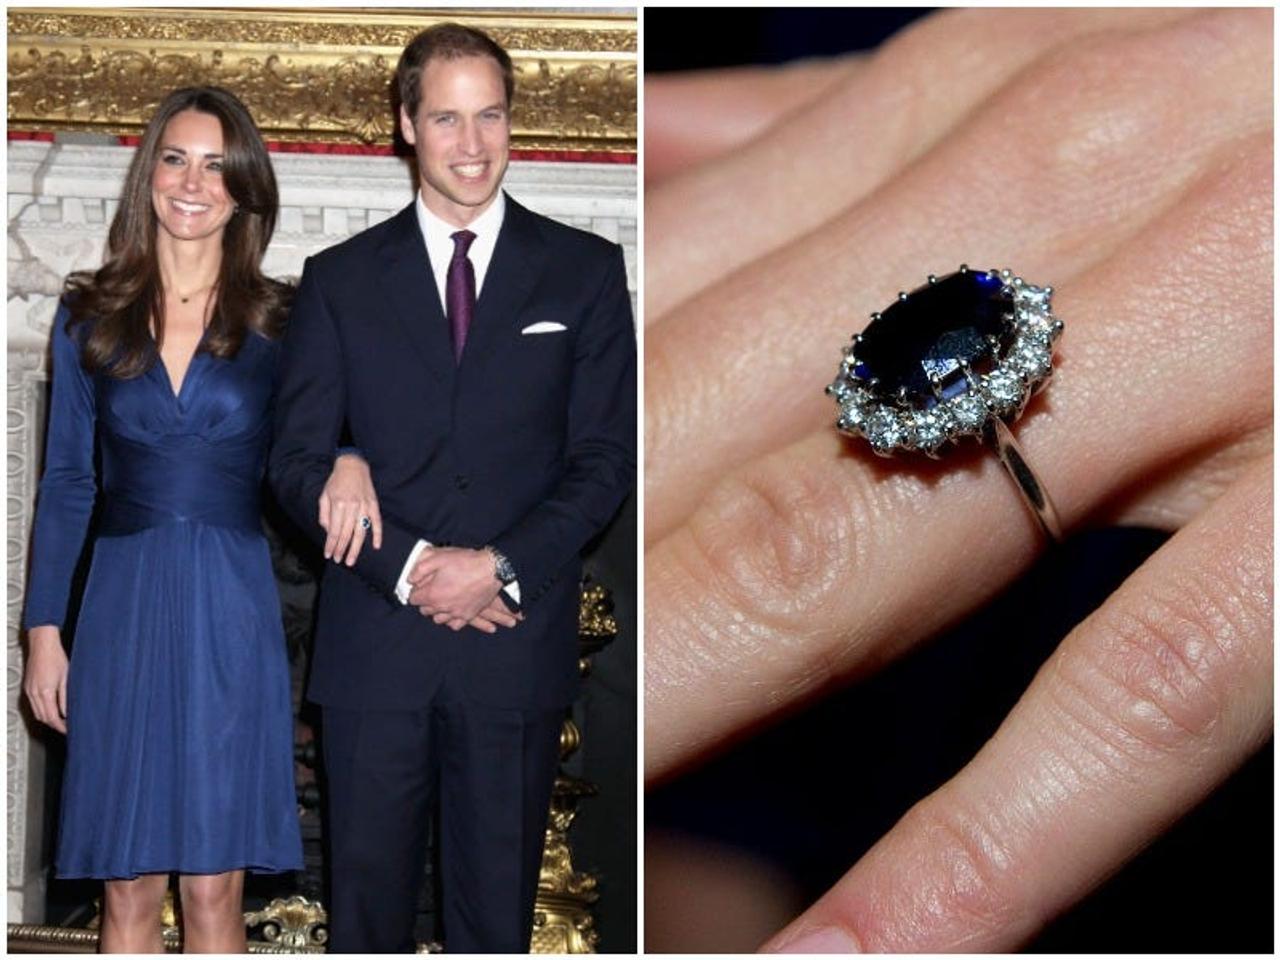 Prince William and Kate Middleton in 2010.